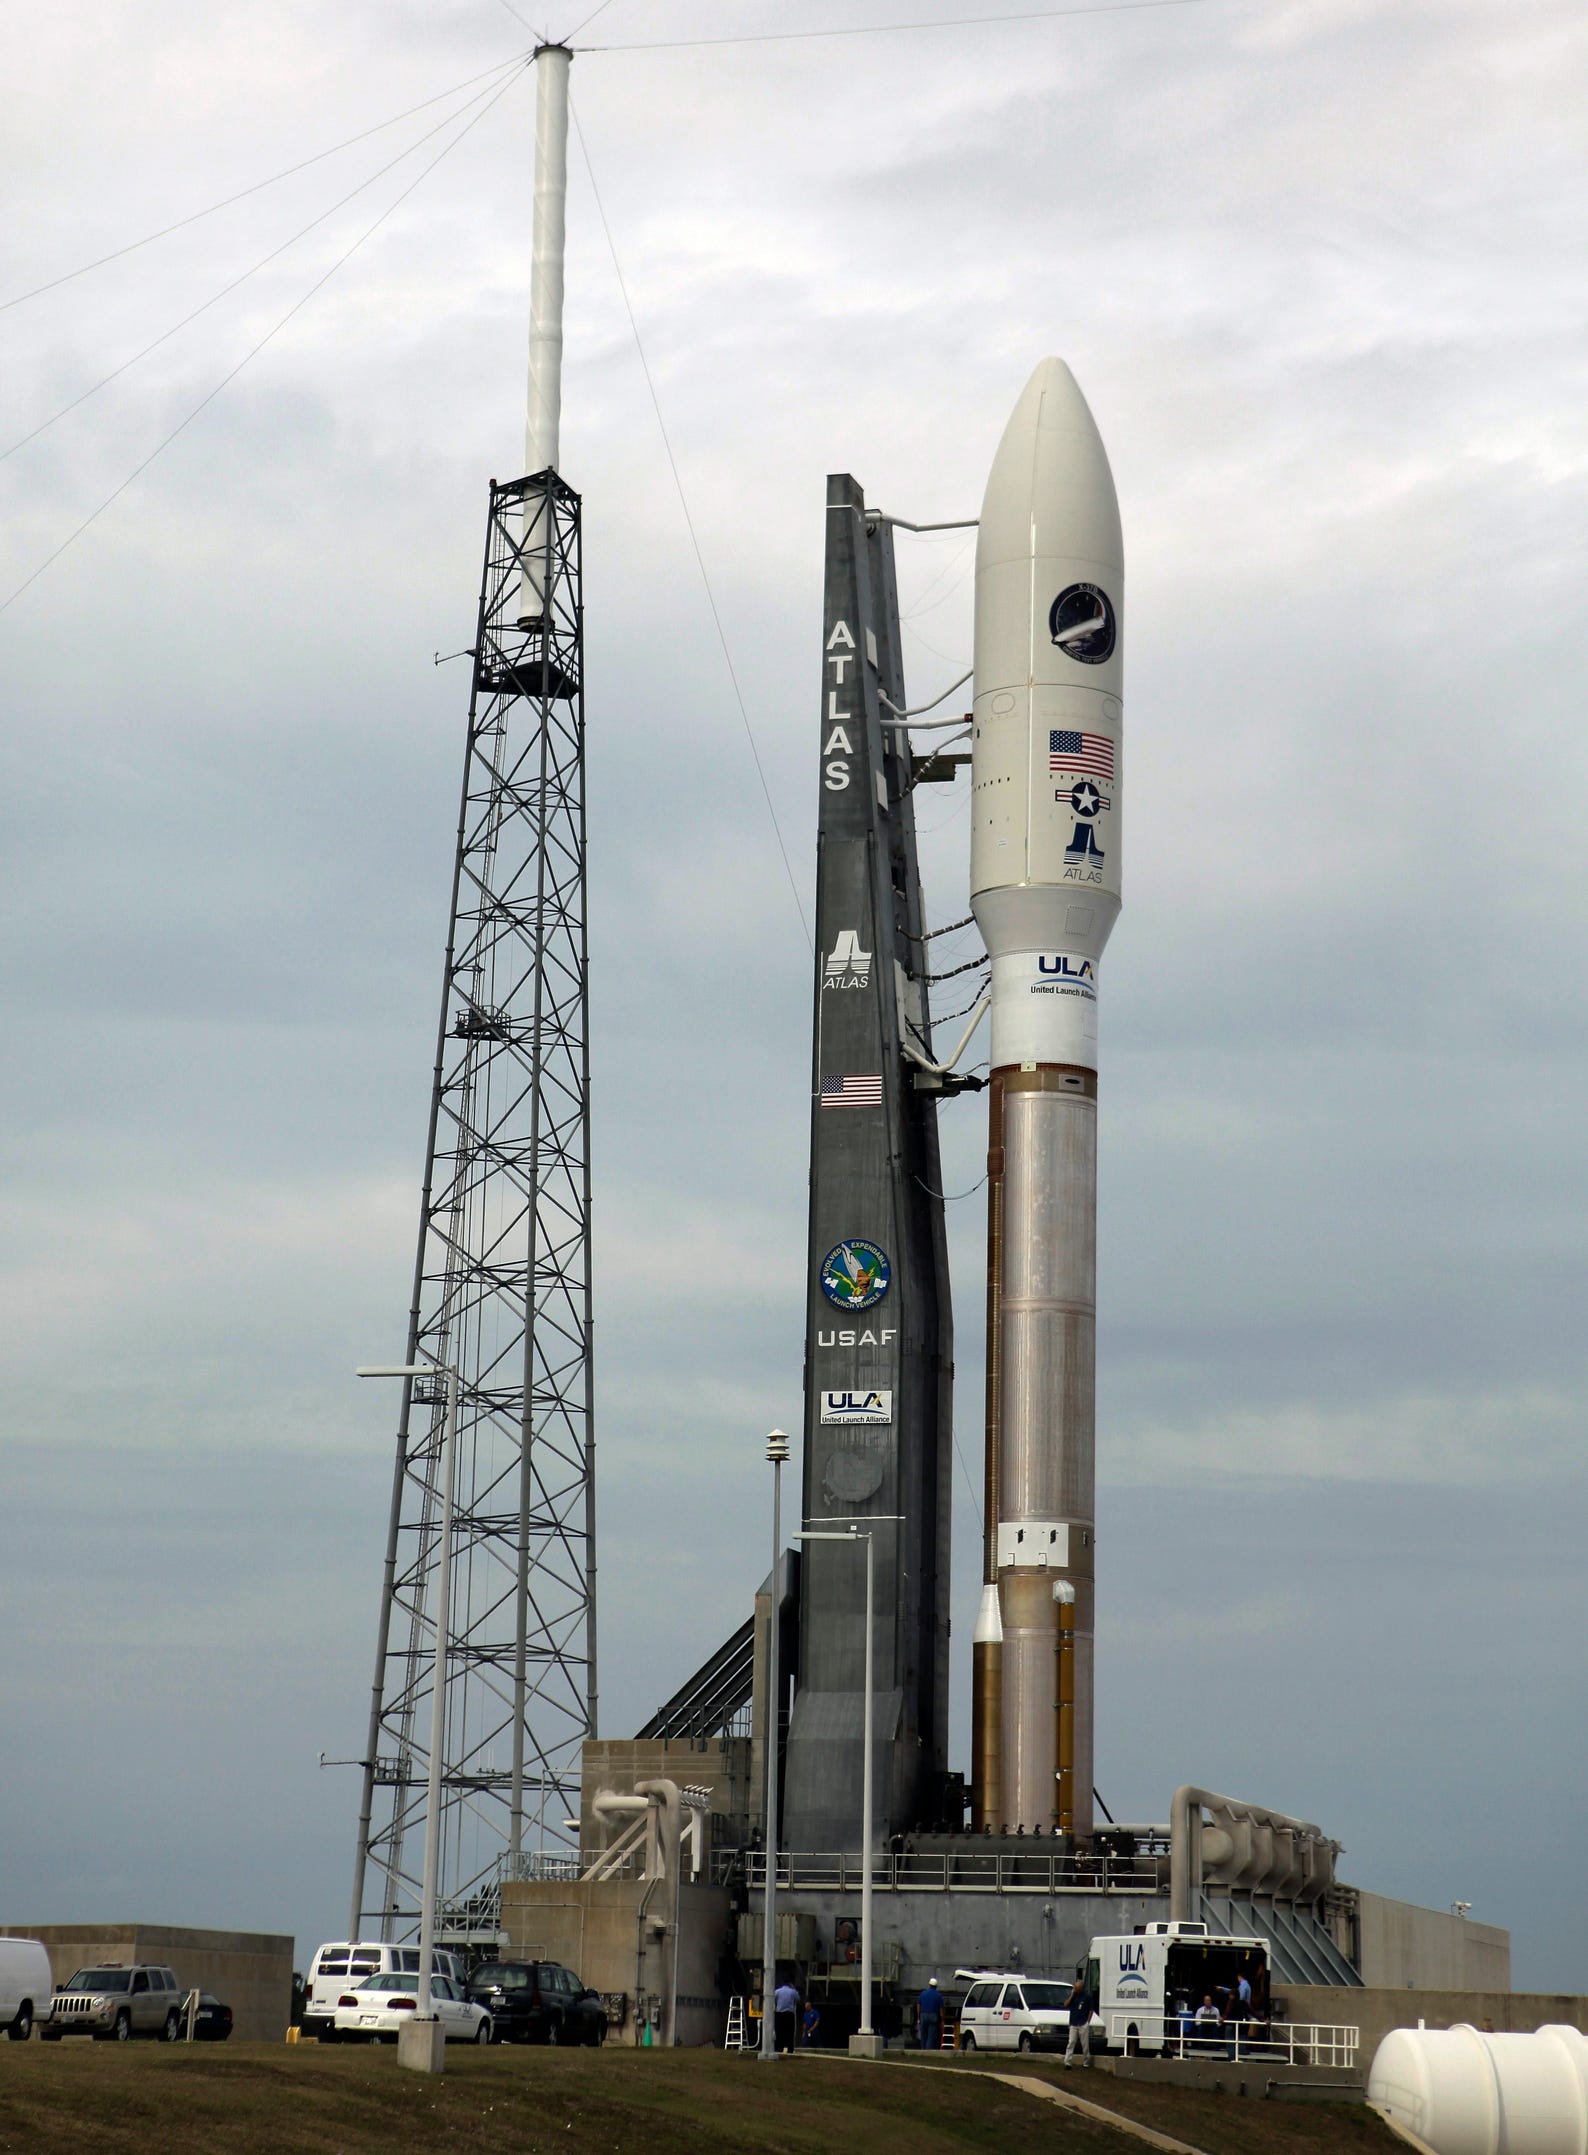 A United Launch Alliance Atlas V rocket stands ready for launch on the Complex 41 pad at the Cape Canaveral Air Force Station, Dec. 10, 2012, in Cape Canaveral, Fla.